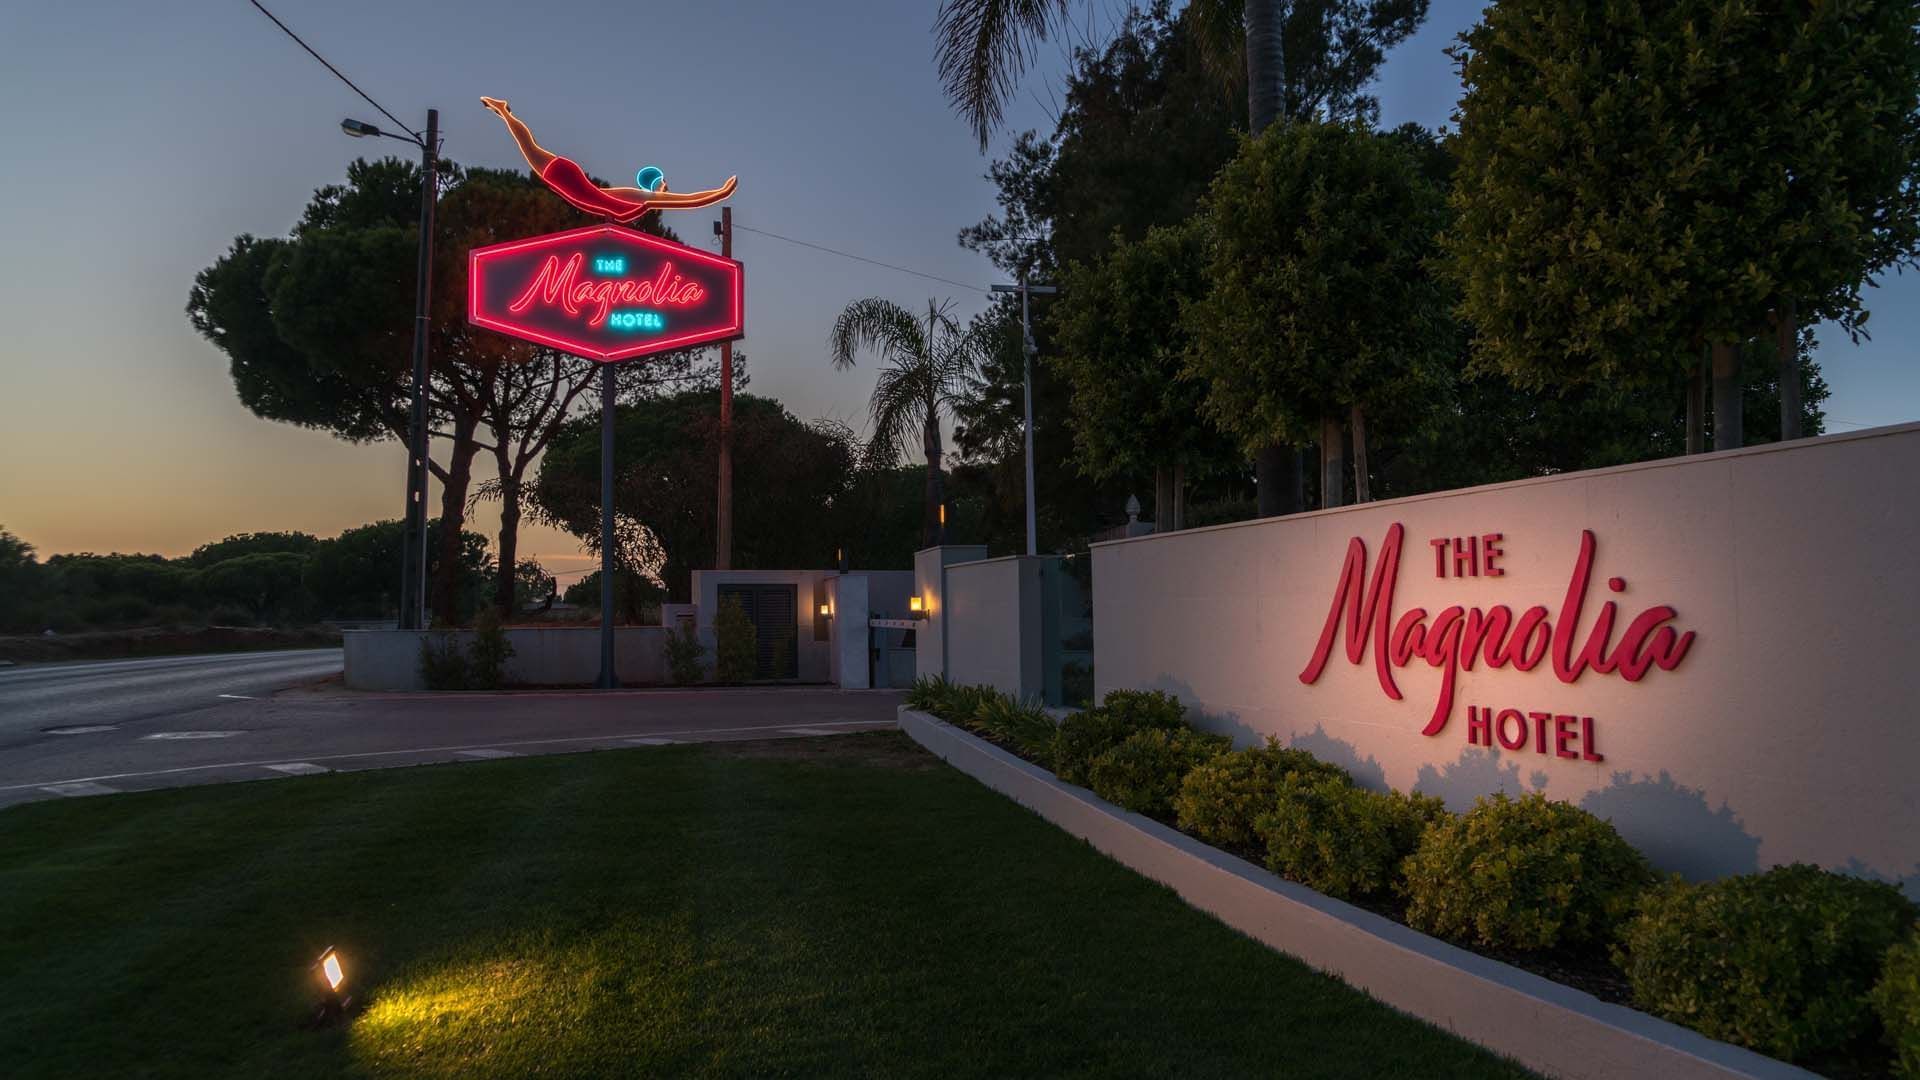 Entrance of The Magnolia Hotel  at night